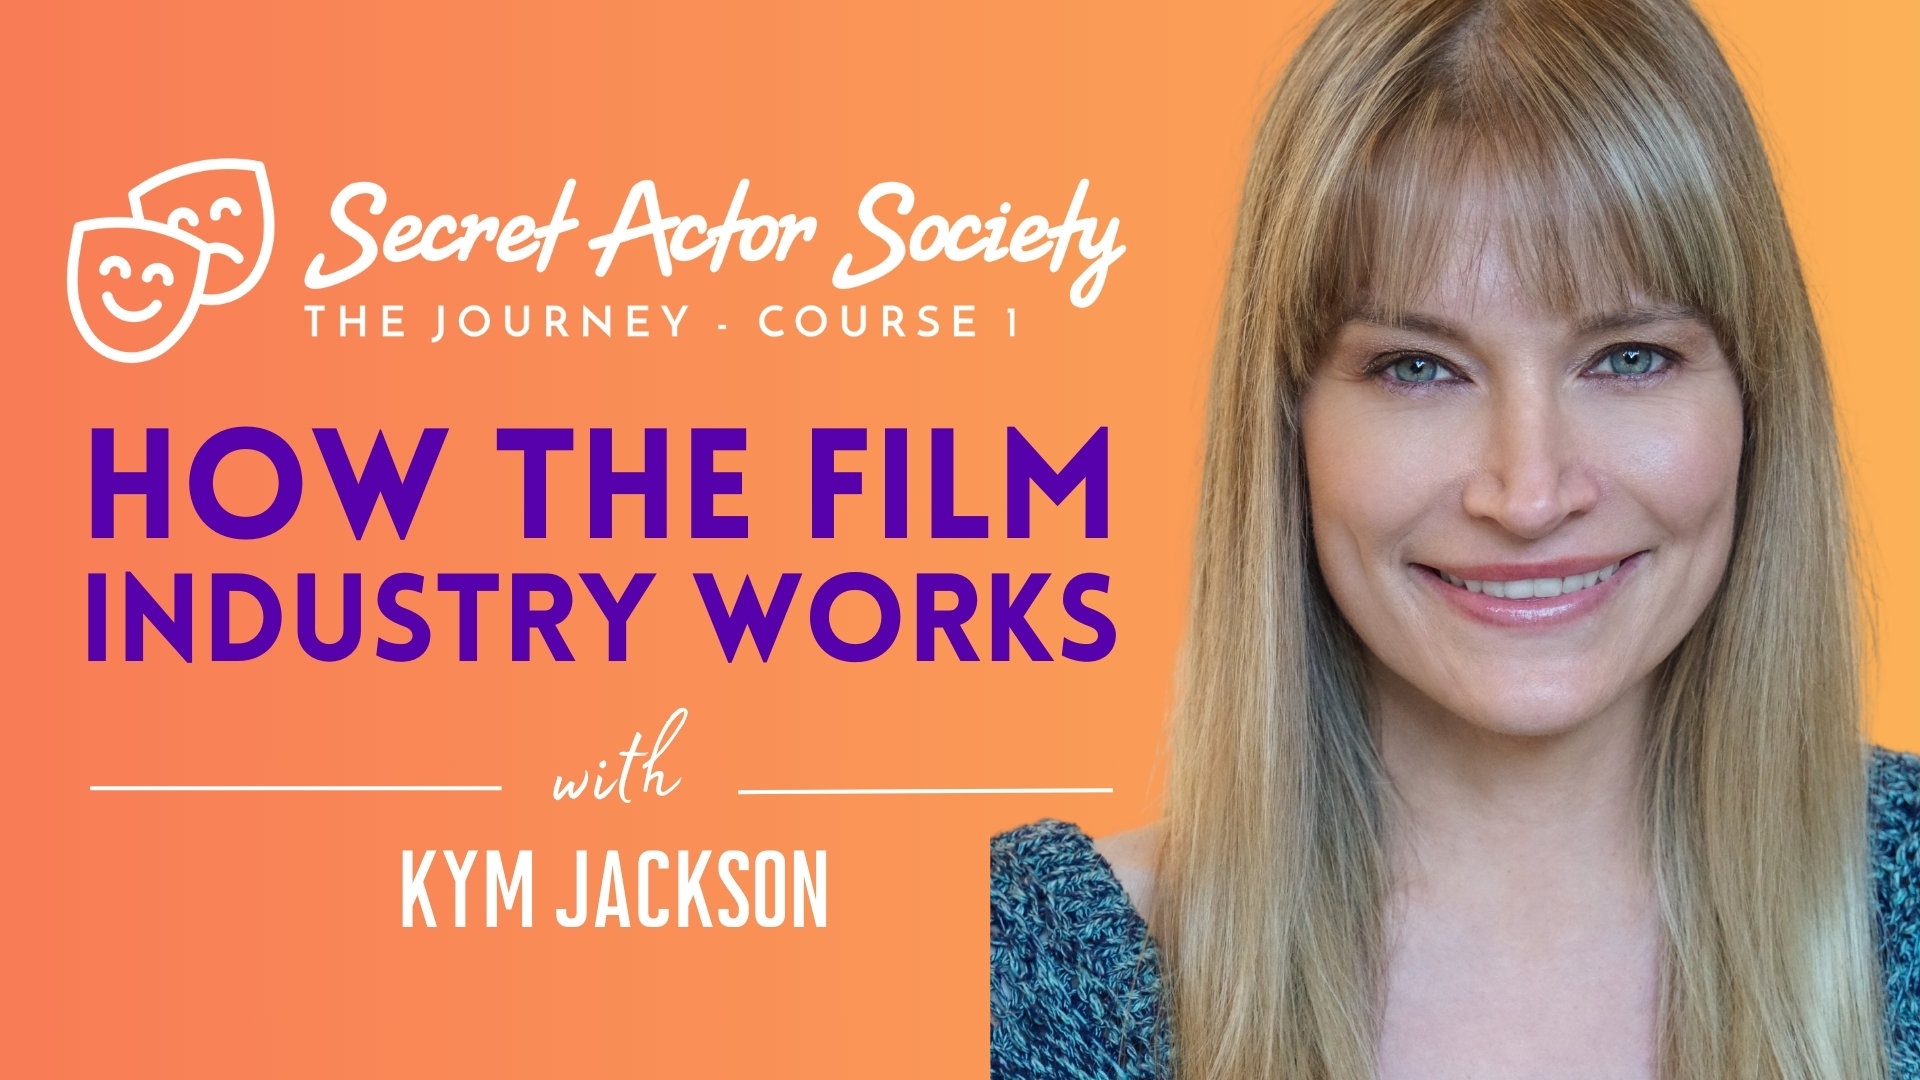 SAS Journey | Course 1 - How the Film Industry Works